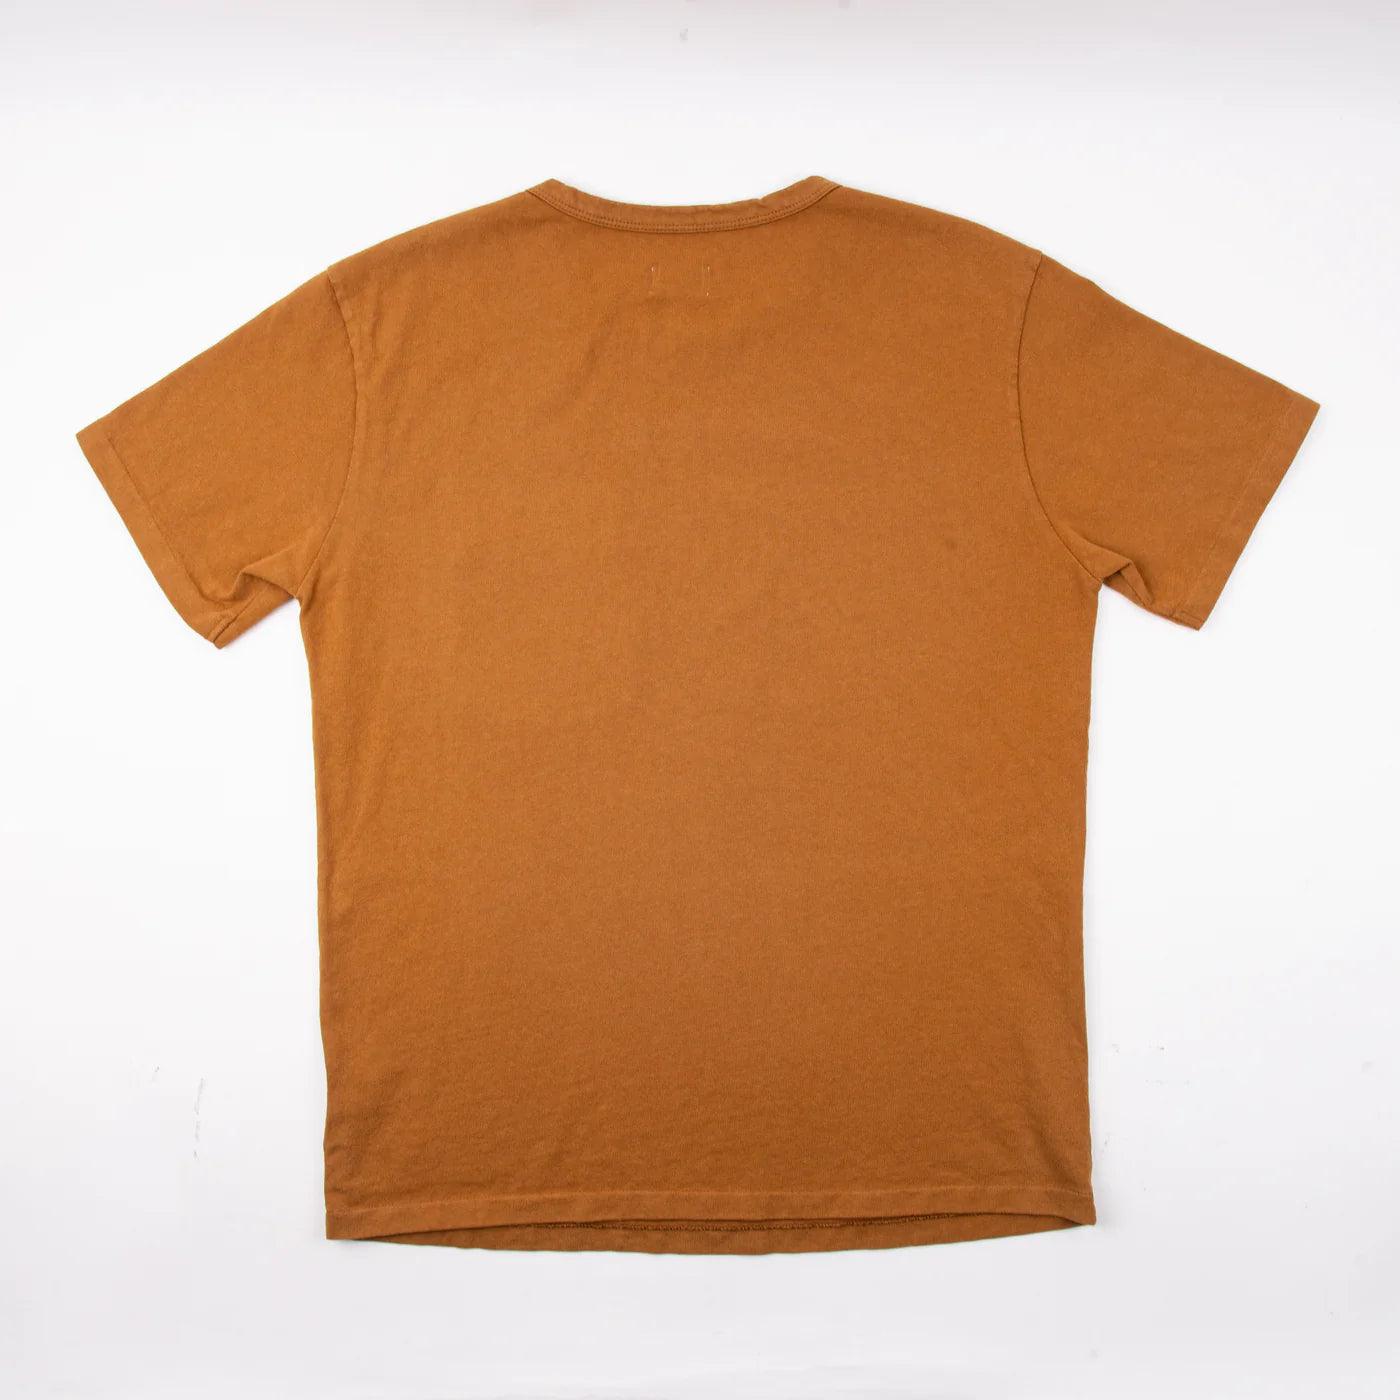 Freenote Cloth Heavyweight 13oz Pocket Tee - Tobacco - Guilty Party